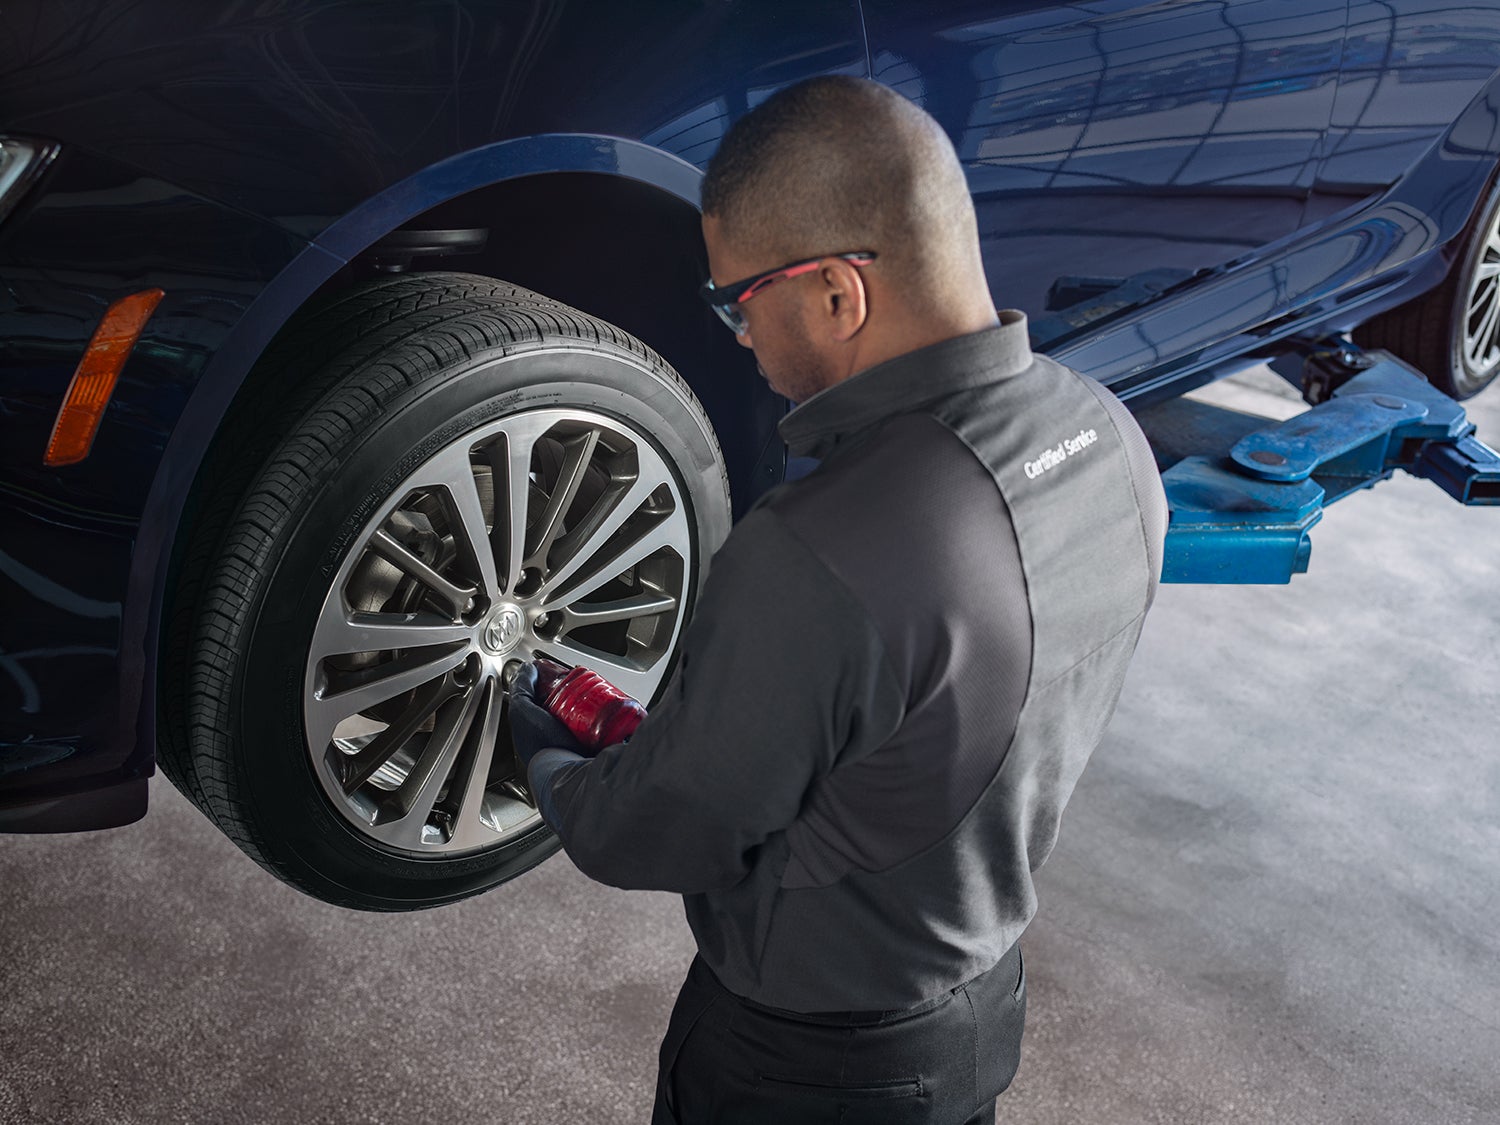 Buick service technician performs a tire rotation.